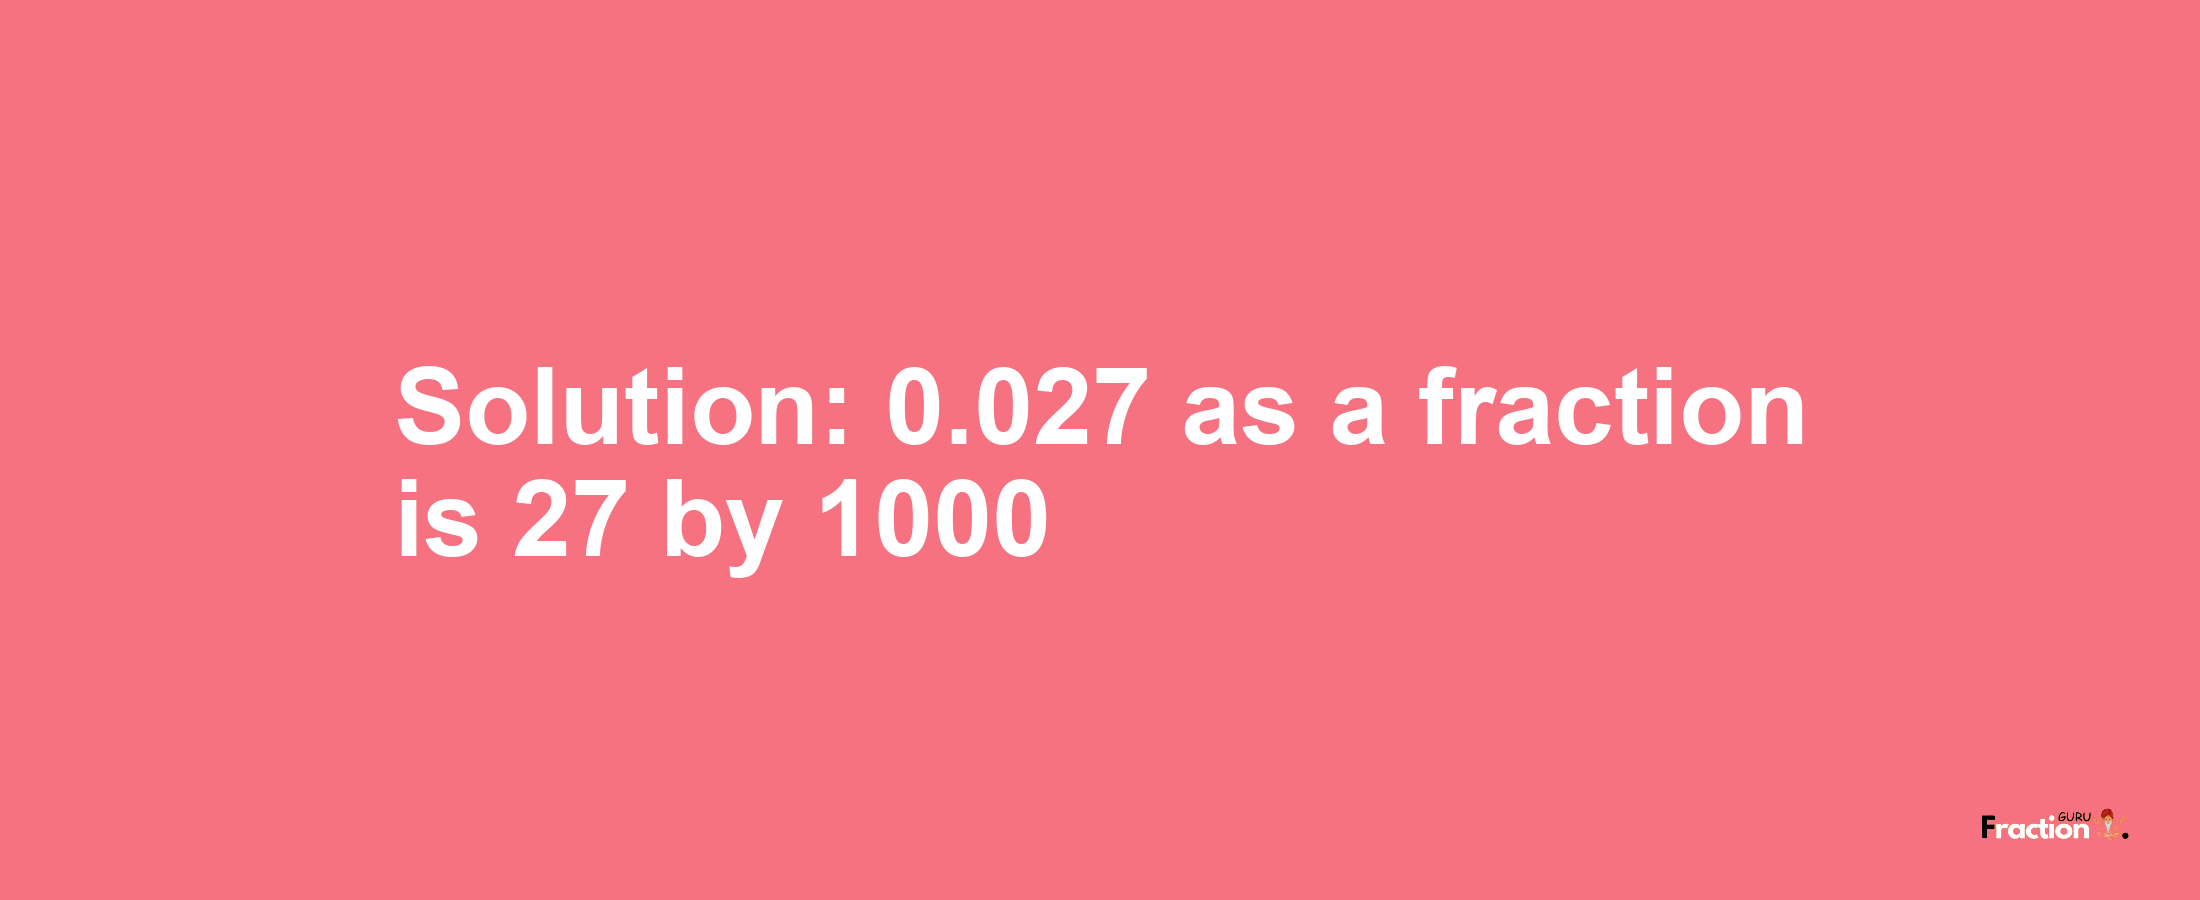 Solution:0.027 as a fraction is 27/1000